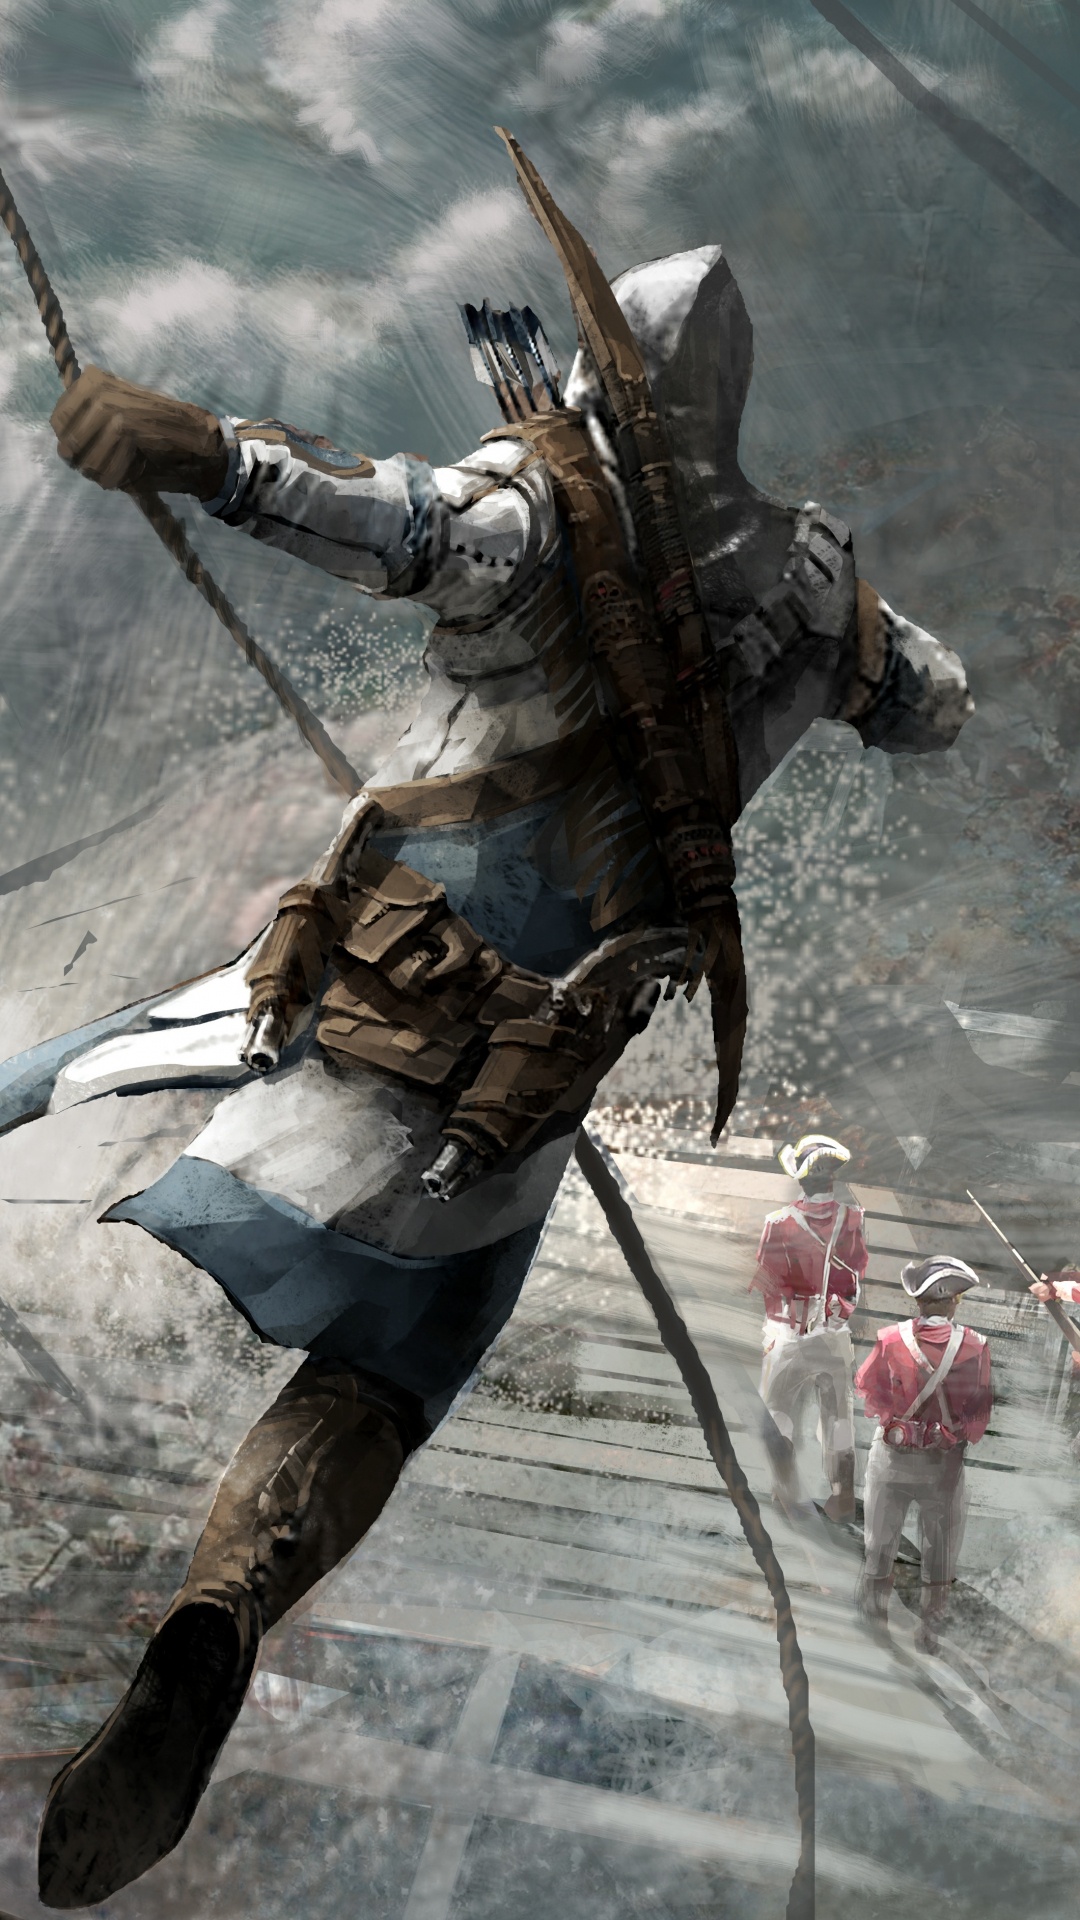 Assassins Creed III, Assassins Creed, Ezio Auditore, Connor Kenway, Ubisoft. Wallpaper in 1080x1920 Resolution